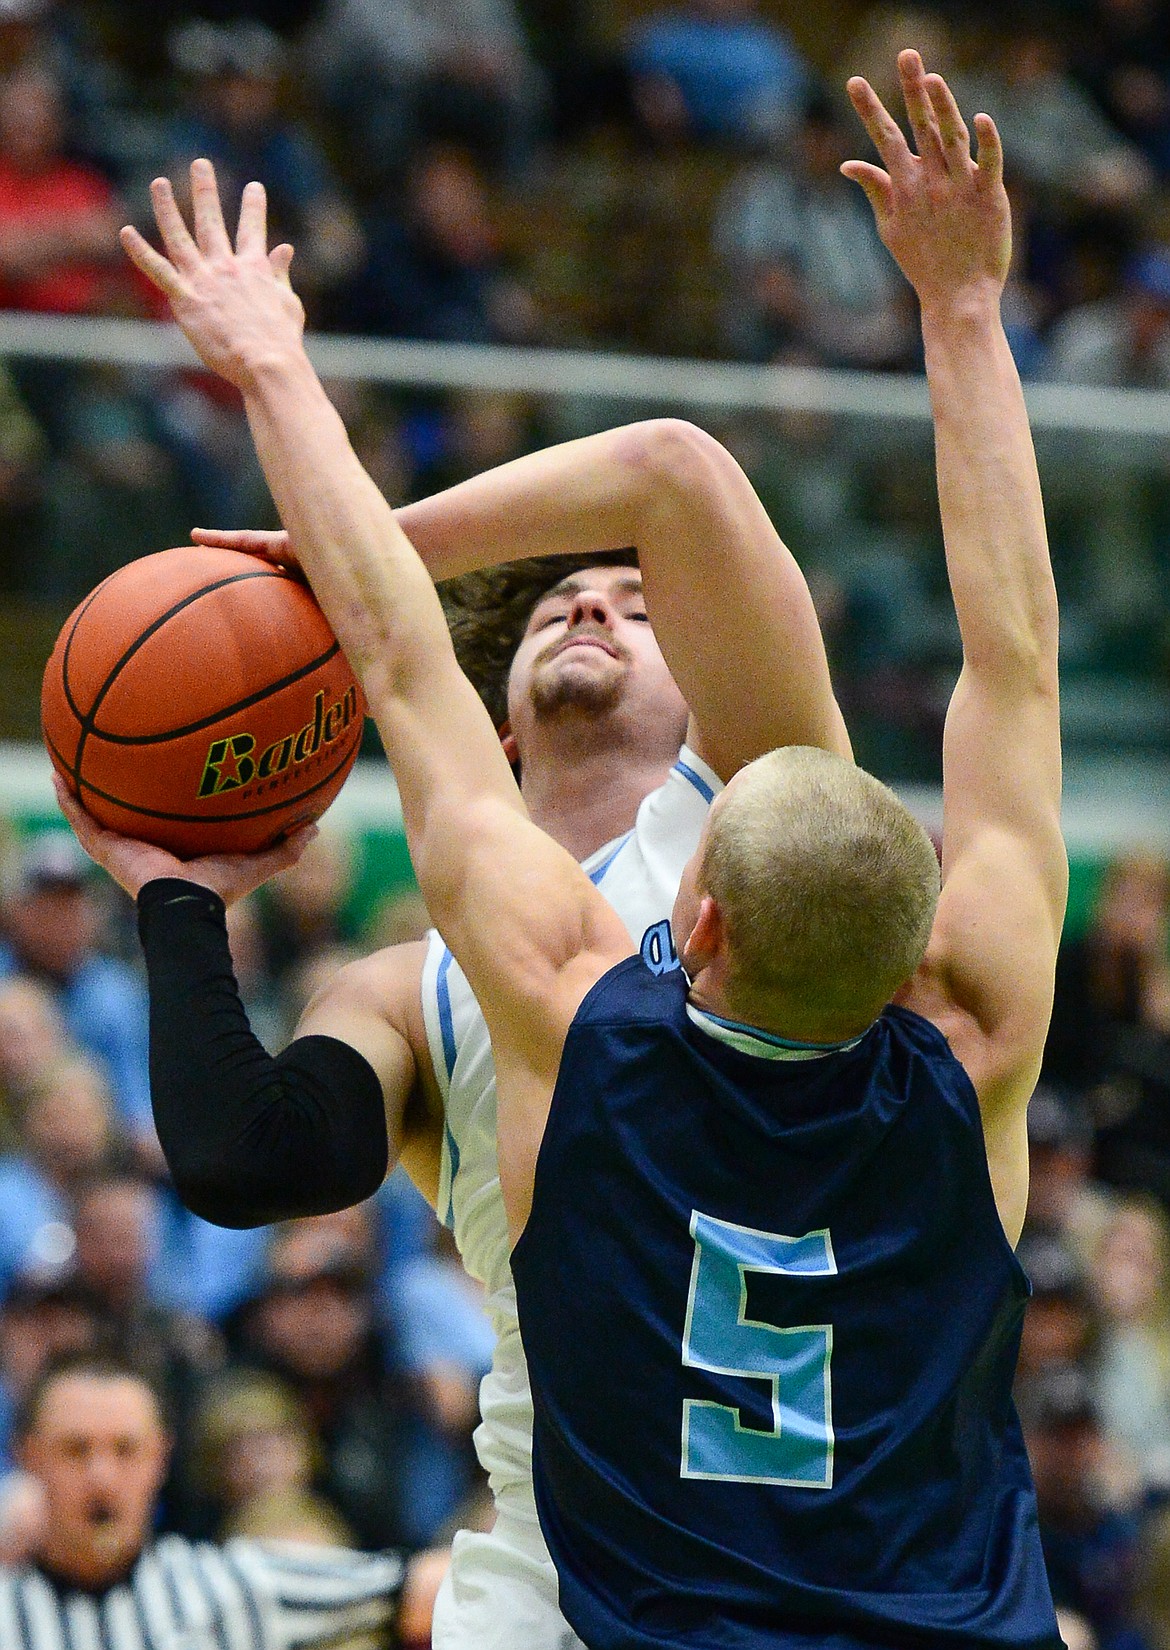 Bigfork's Anders Epperly (0) drives to the hoop against Loyola Sacred Heart's Jacob Hollenback (5) in the State Class B boys' basketball championship at the Belgrade Special Events Center in Belgrade on Friday. (Casey Kreider/Daily Inter Lake)